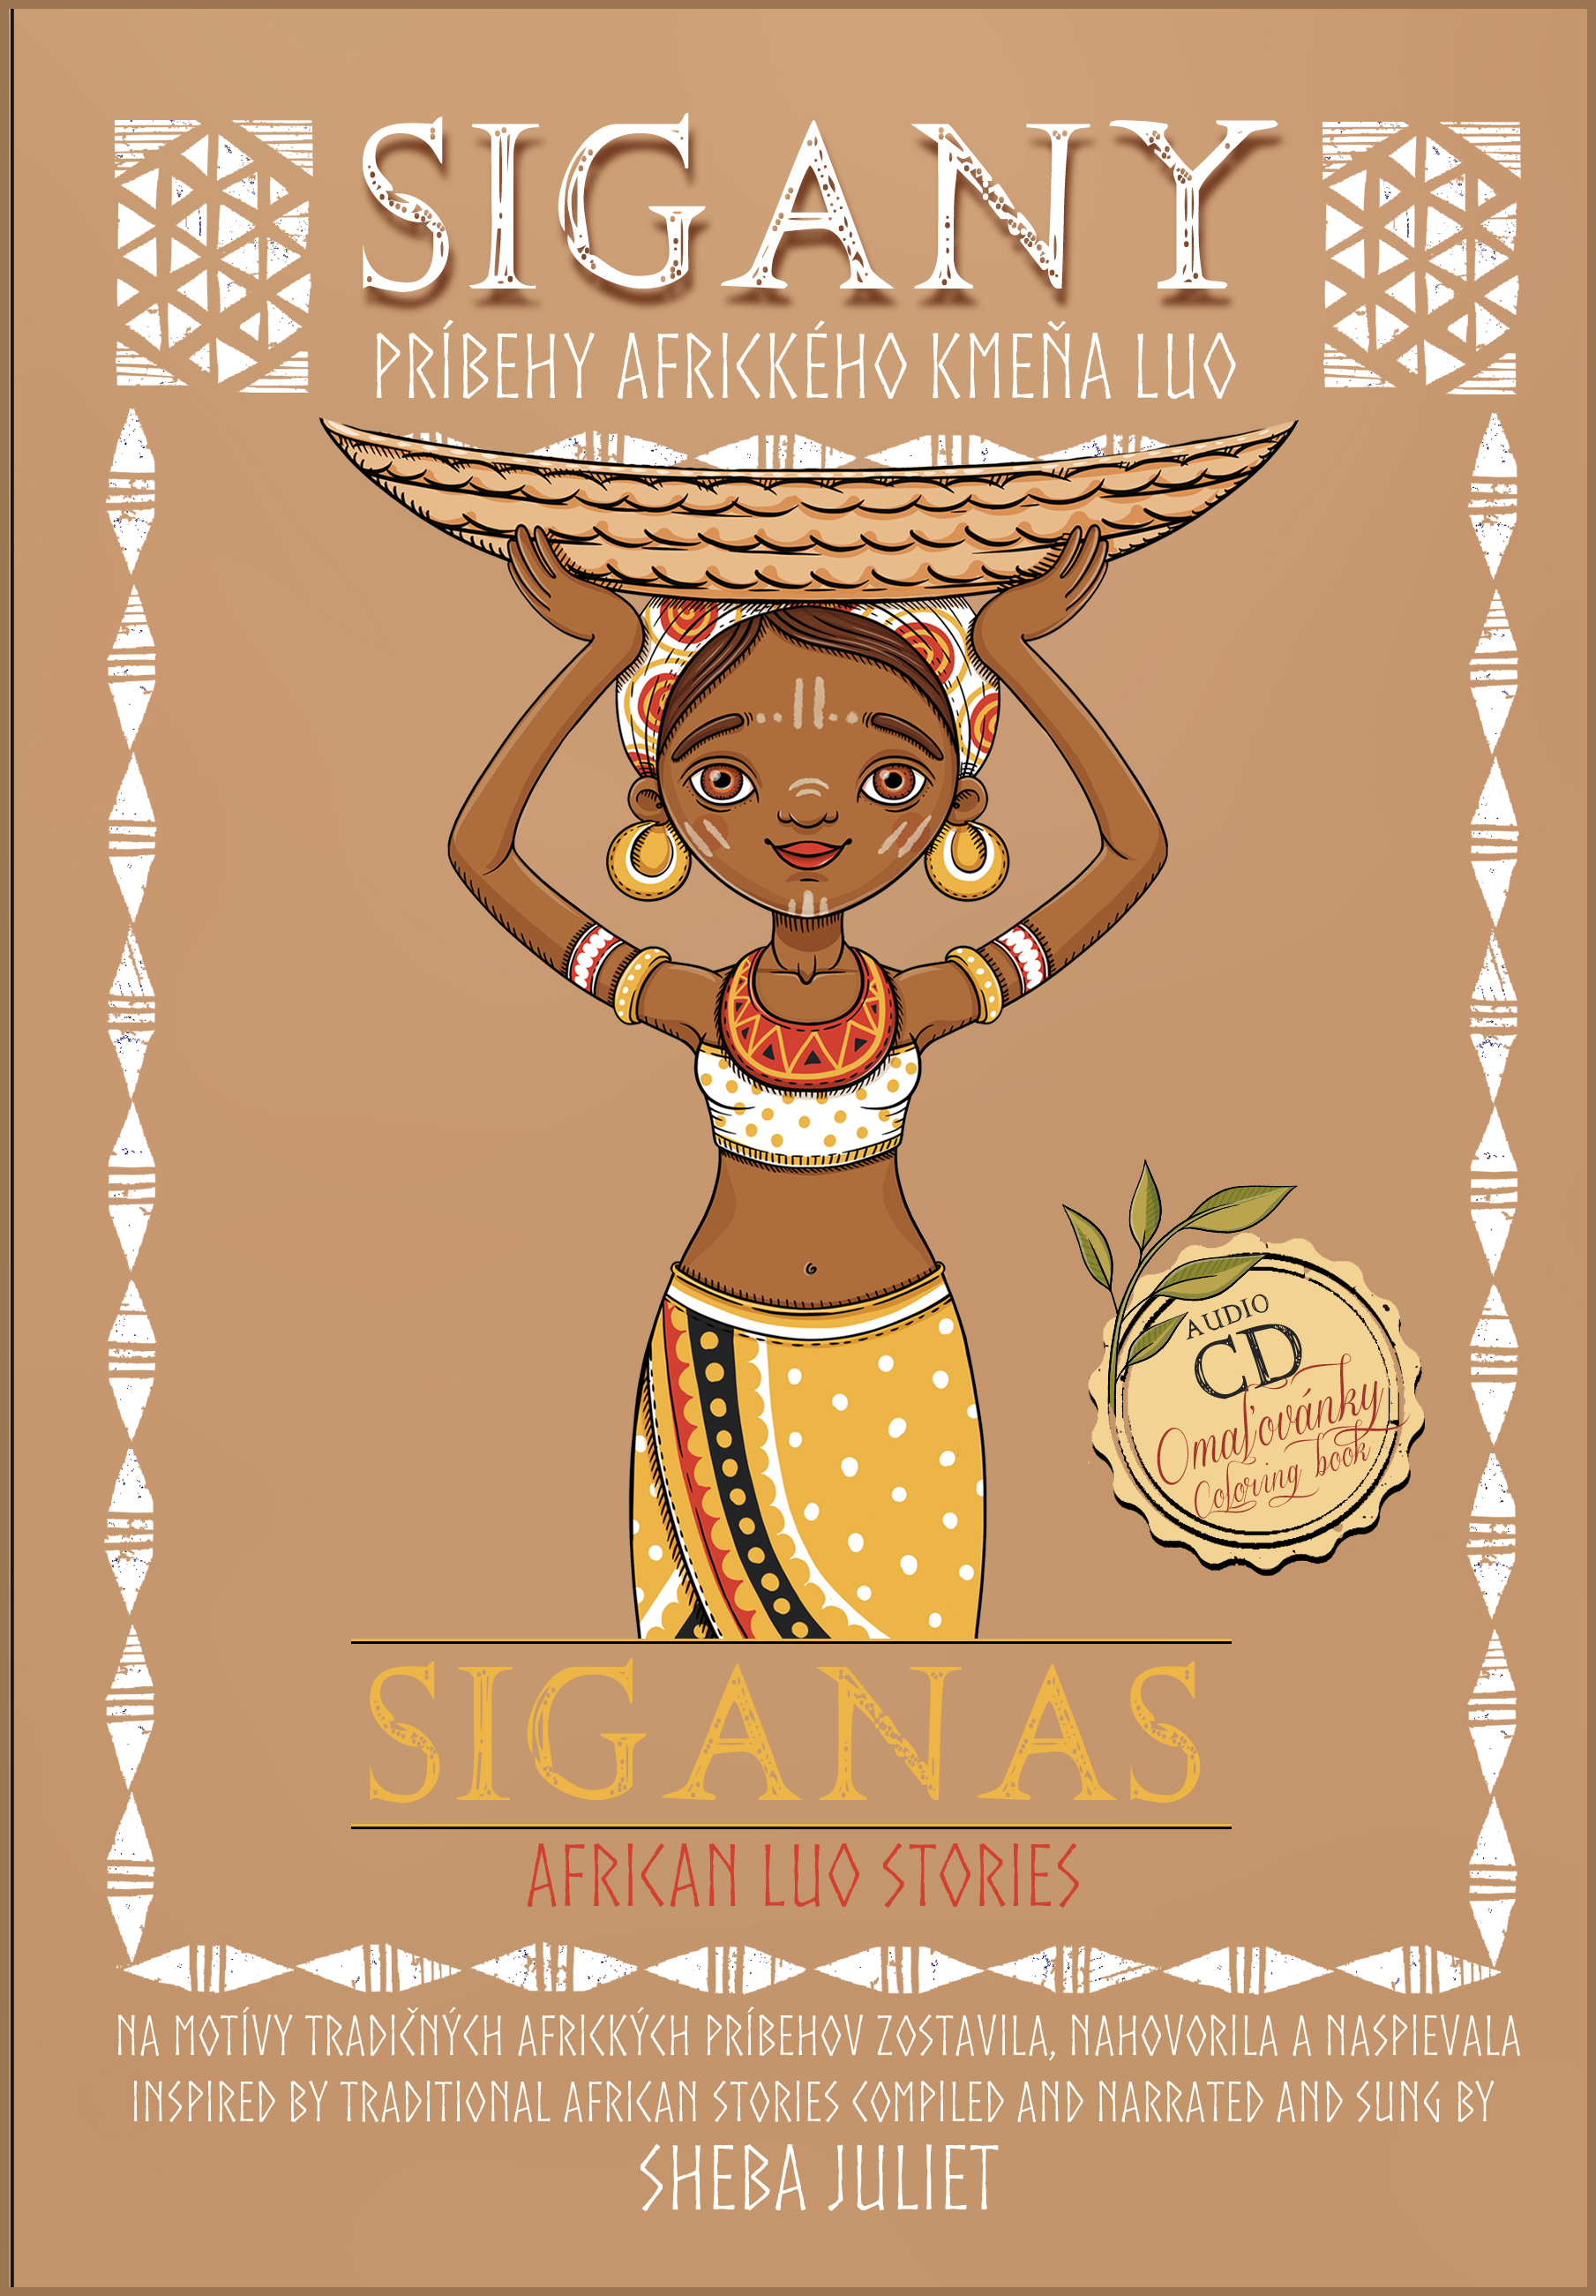 Siganas – African Luo stories